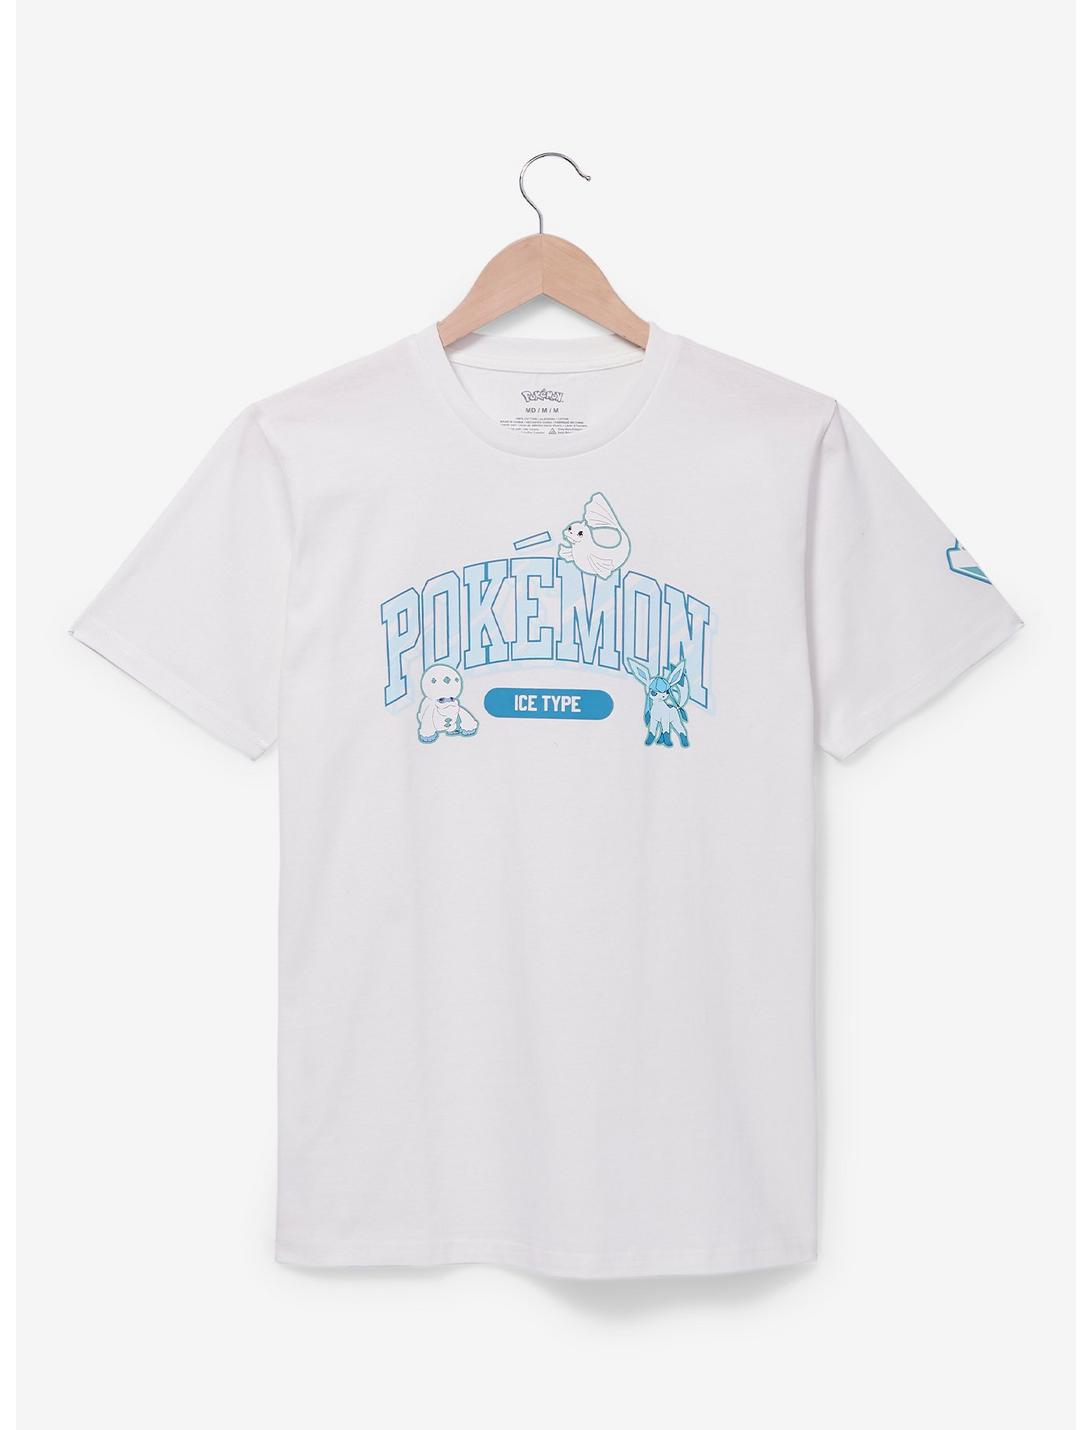 Pokémon Ice Type Women's T-Shirt - BoxLunch Exclusive, OFF WHITE, hi-res